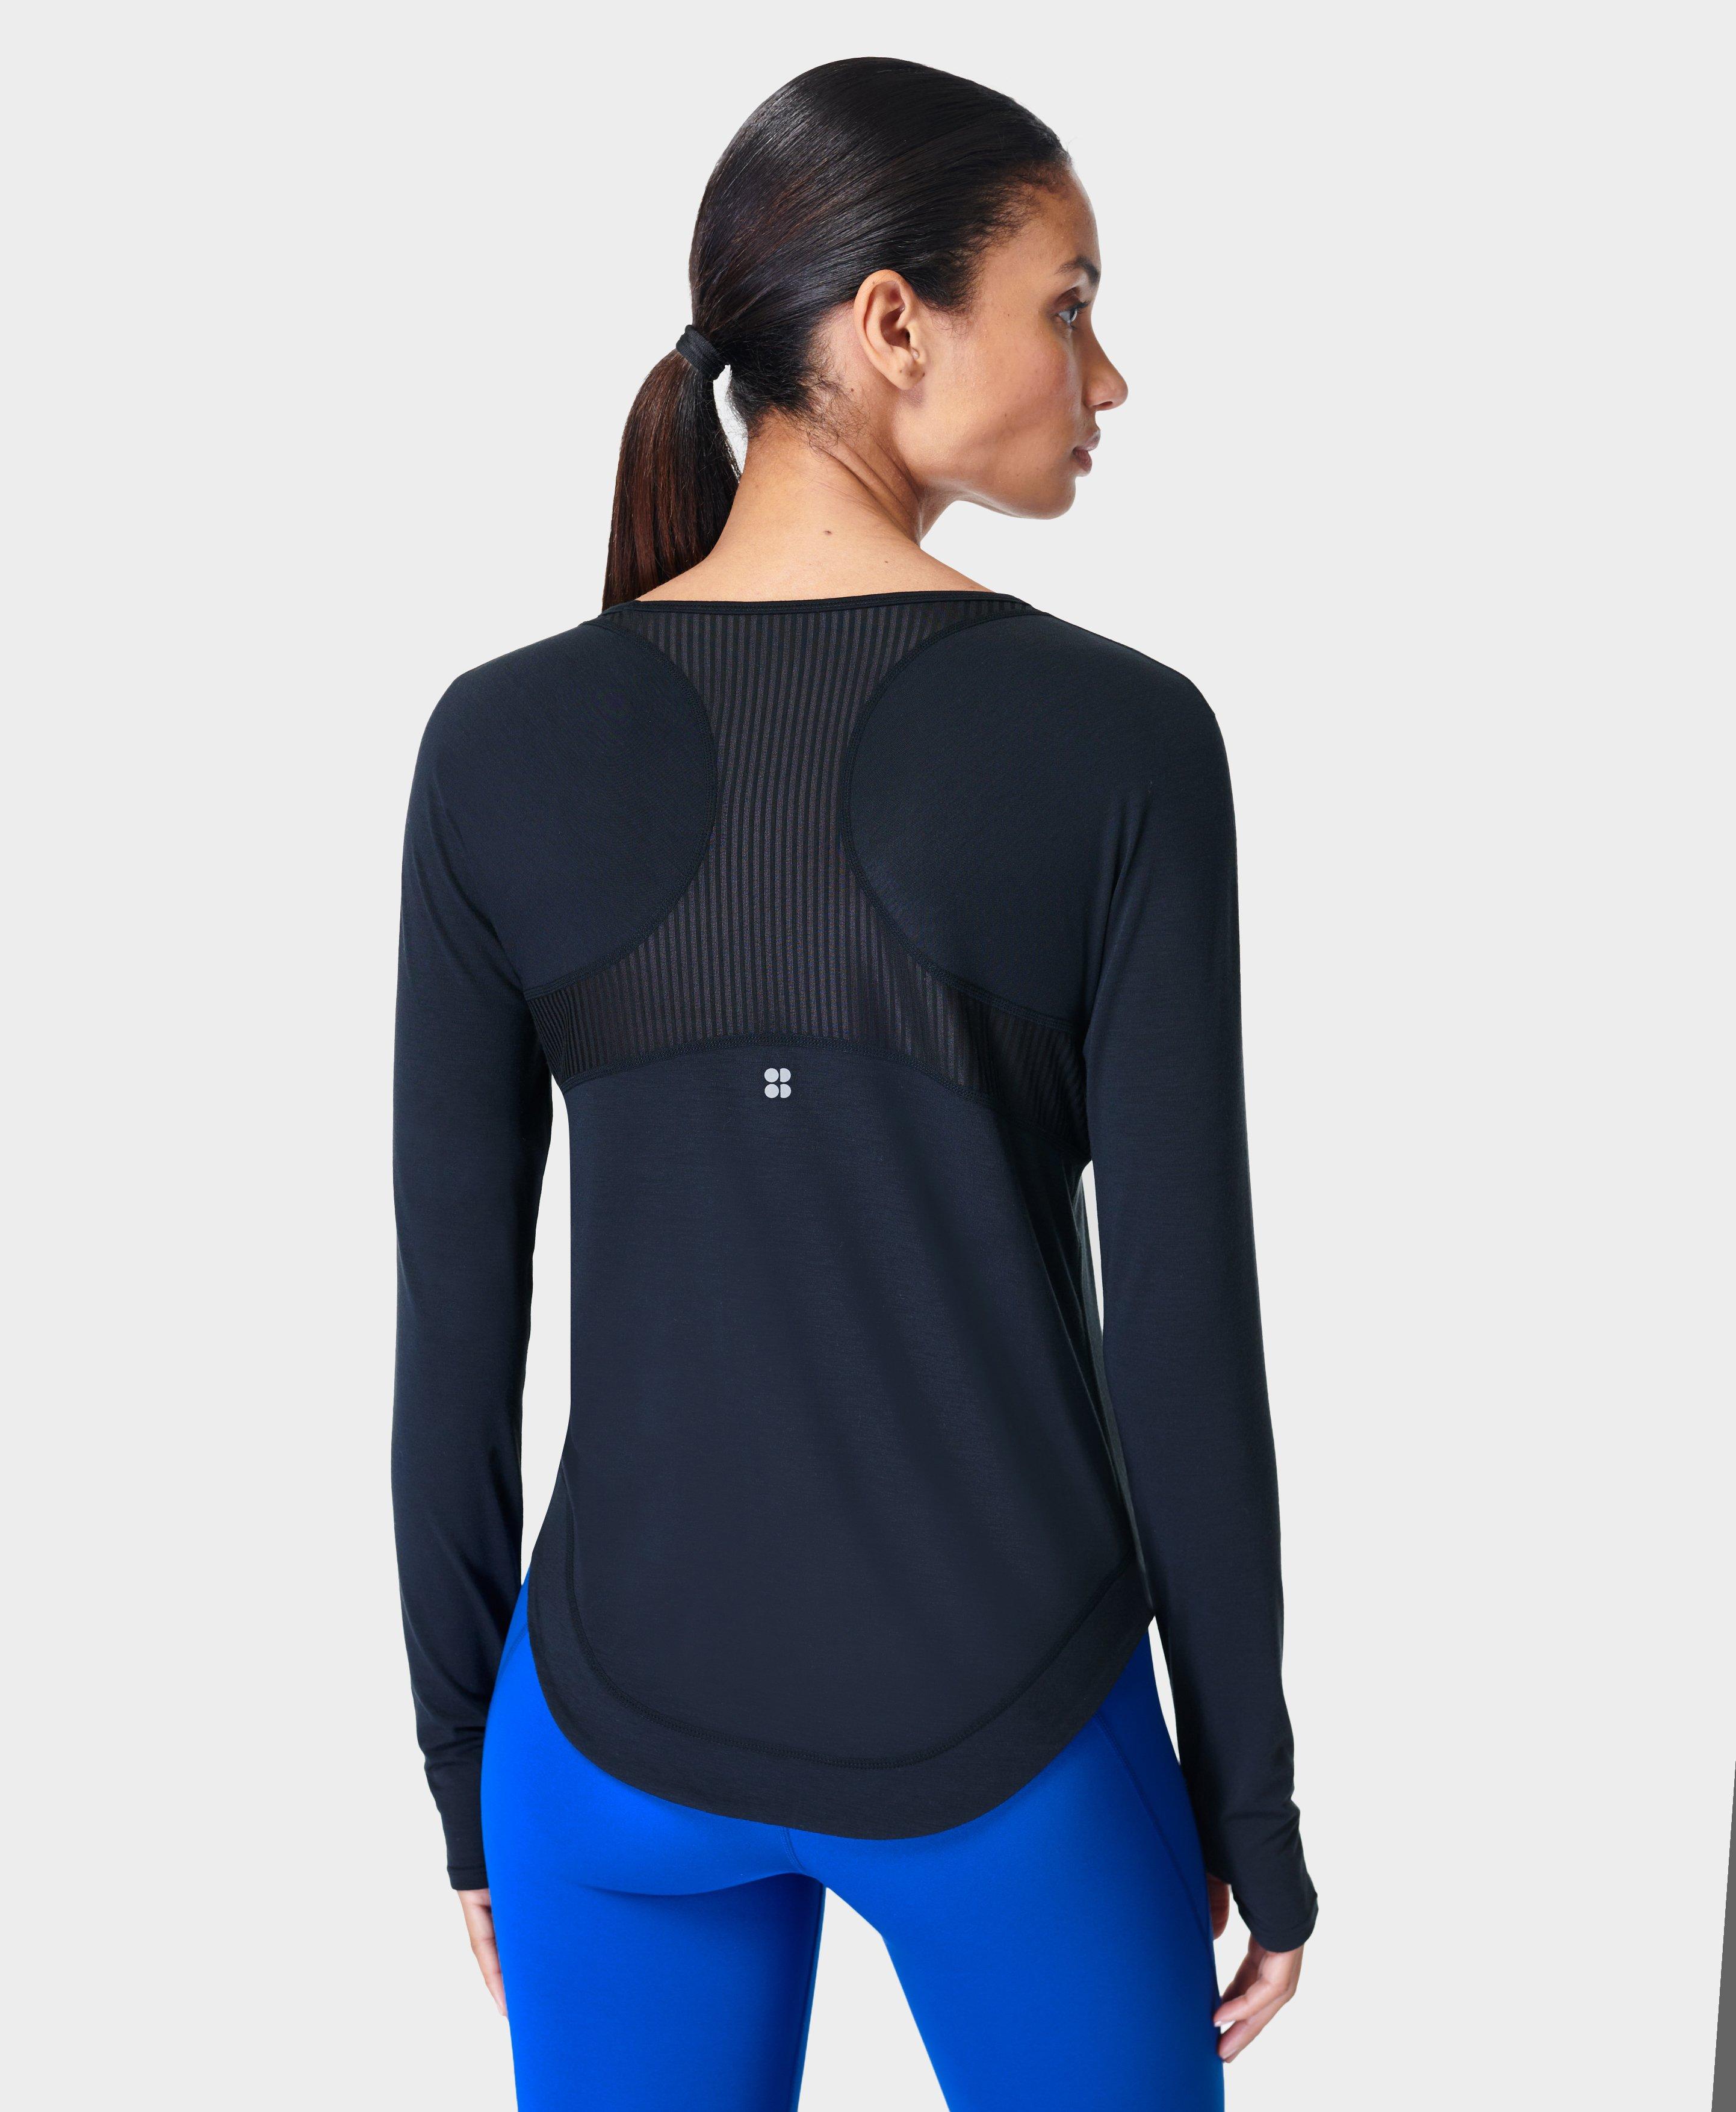 OmicGot Sports Womens Compression Shirt Long Sleeve Tops Running Yoga  Workout Athletic Seamless Shirts Base Layer